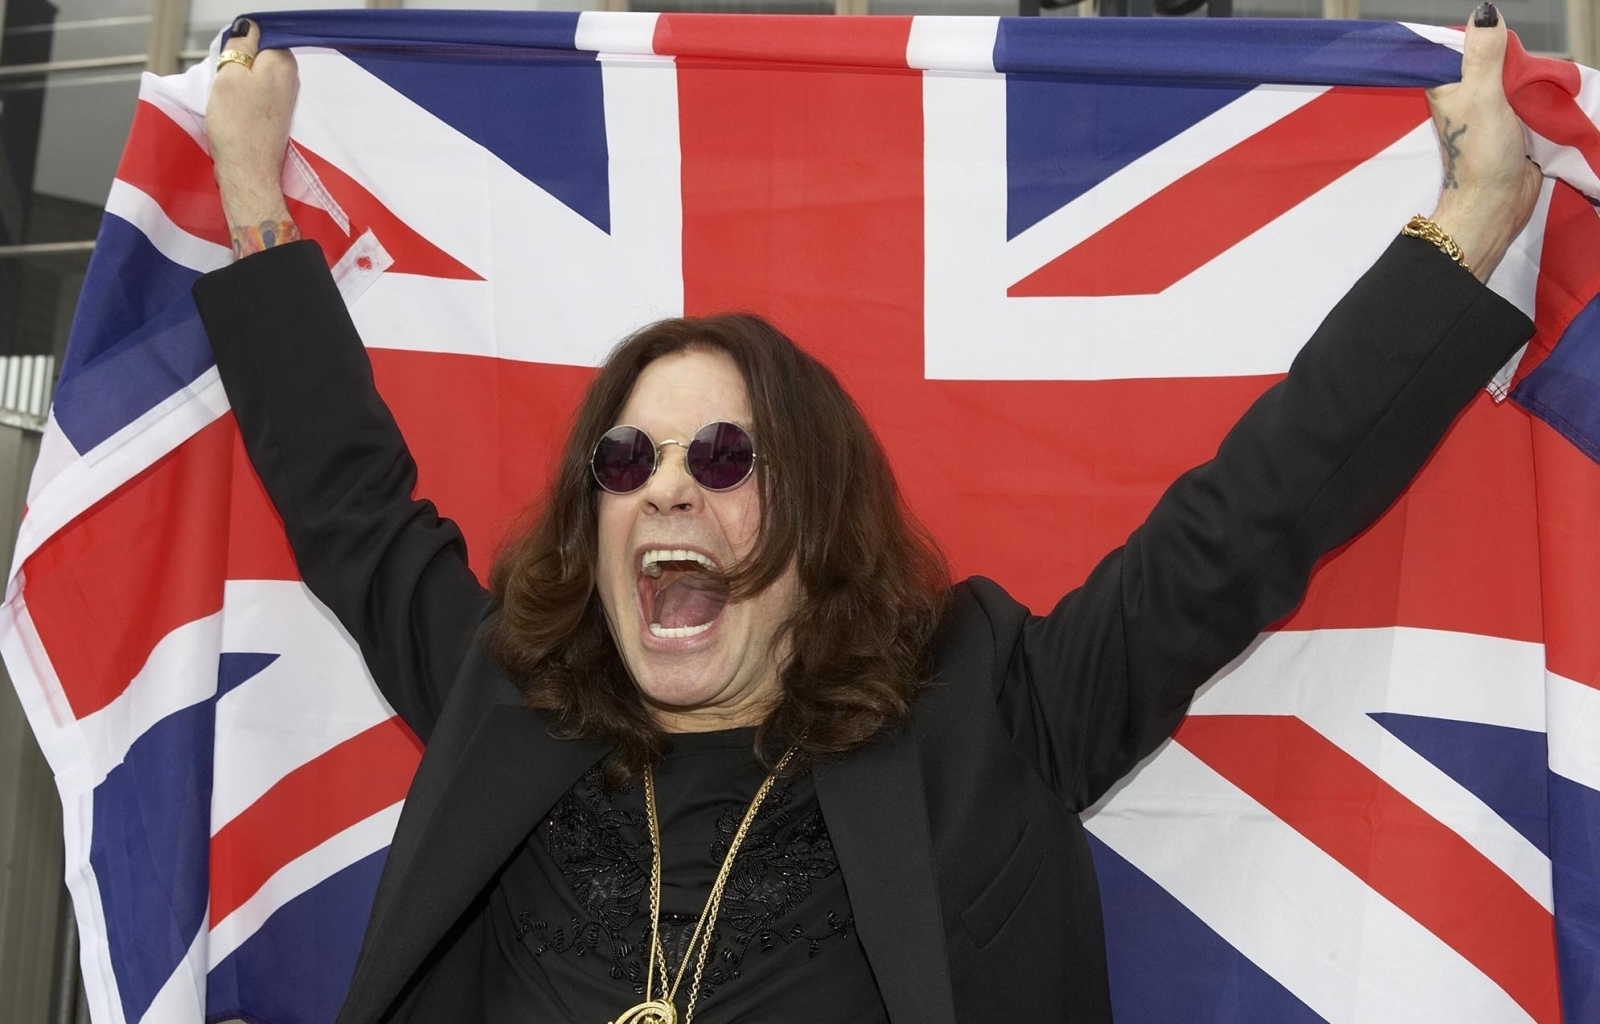 42272 2560x1600 PC pictures for free, download men, people, ozzy osbourne 2560x1600 wallpapers on your desktop